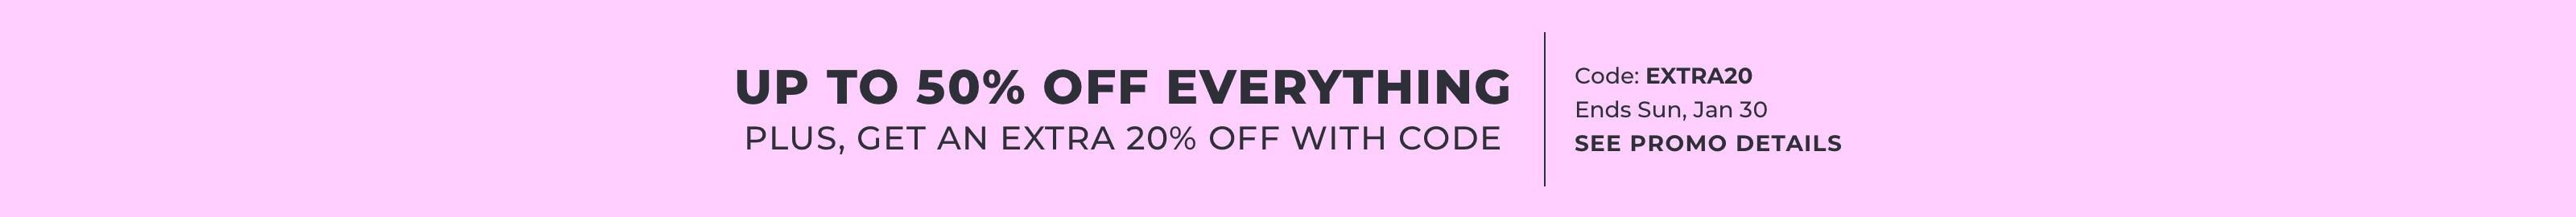 Up to 50% off everything plus, get an extra 20% off with code, code: EXTRA20, Ends Sun, Jan 30, see promo details